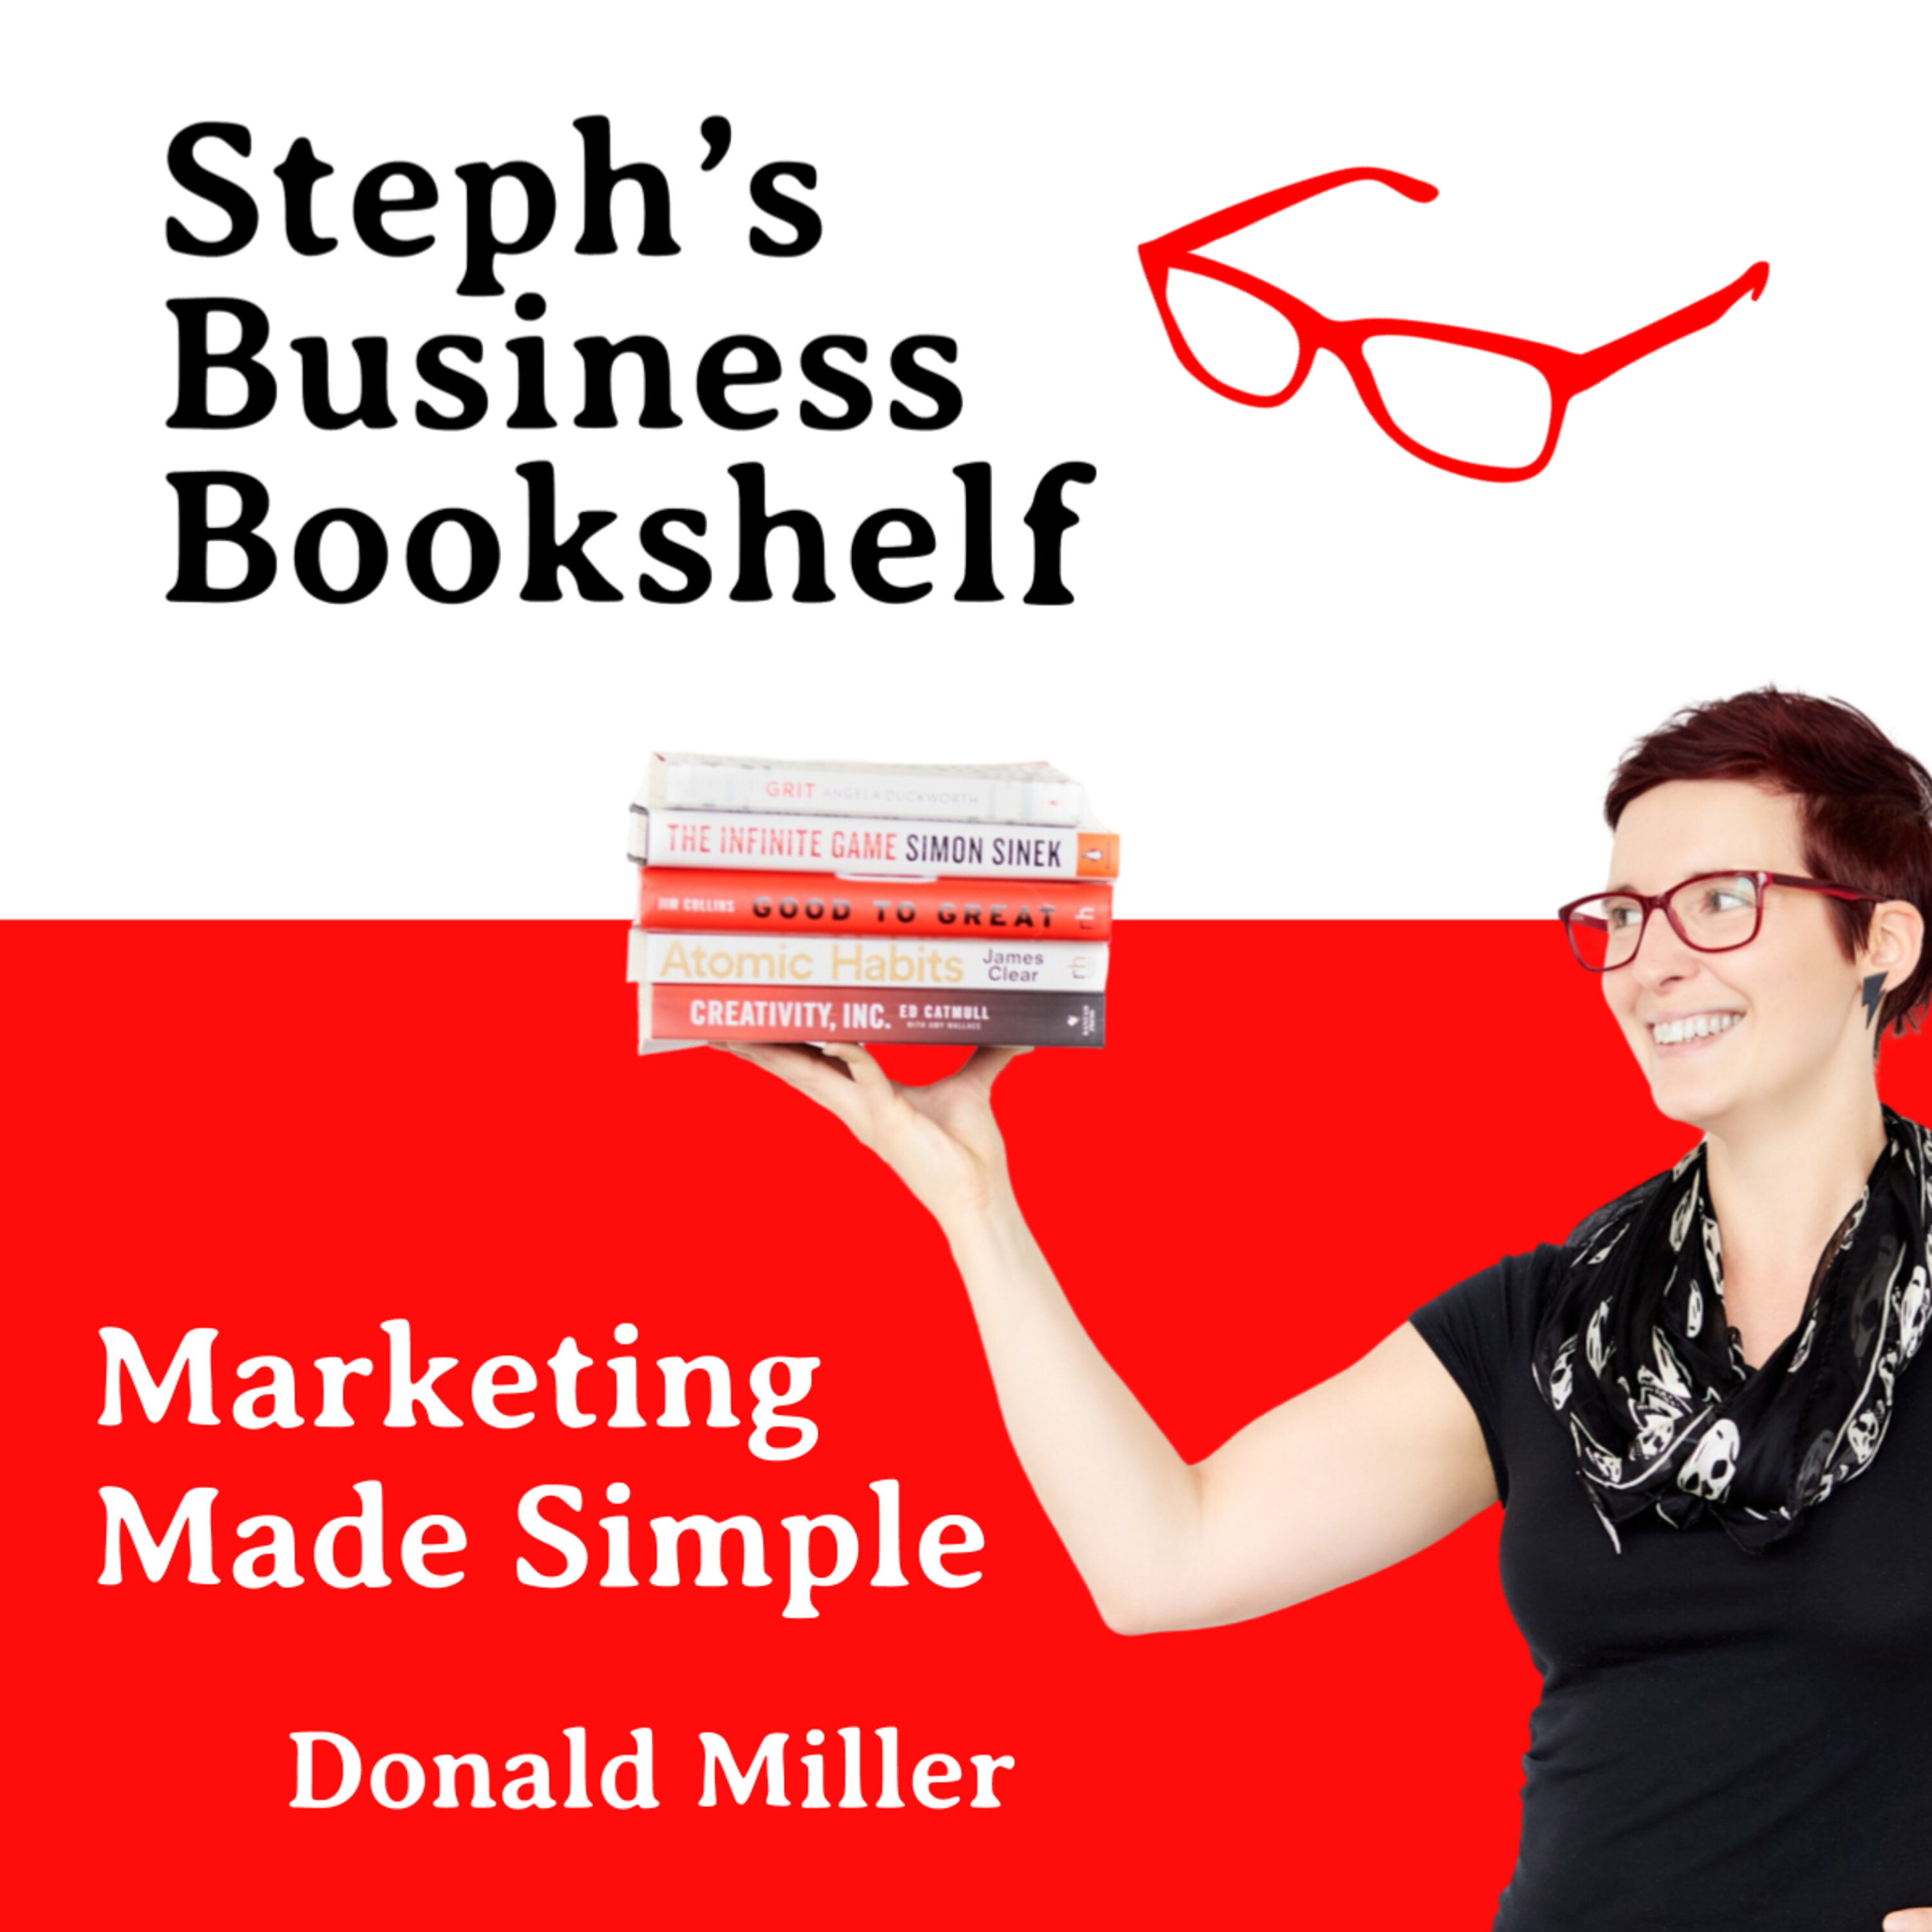 Marketing Made Simple by Donald Miller: How to use enlightenment to create commitment Image